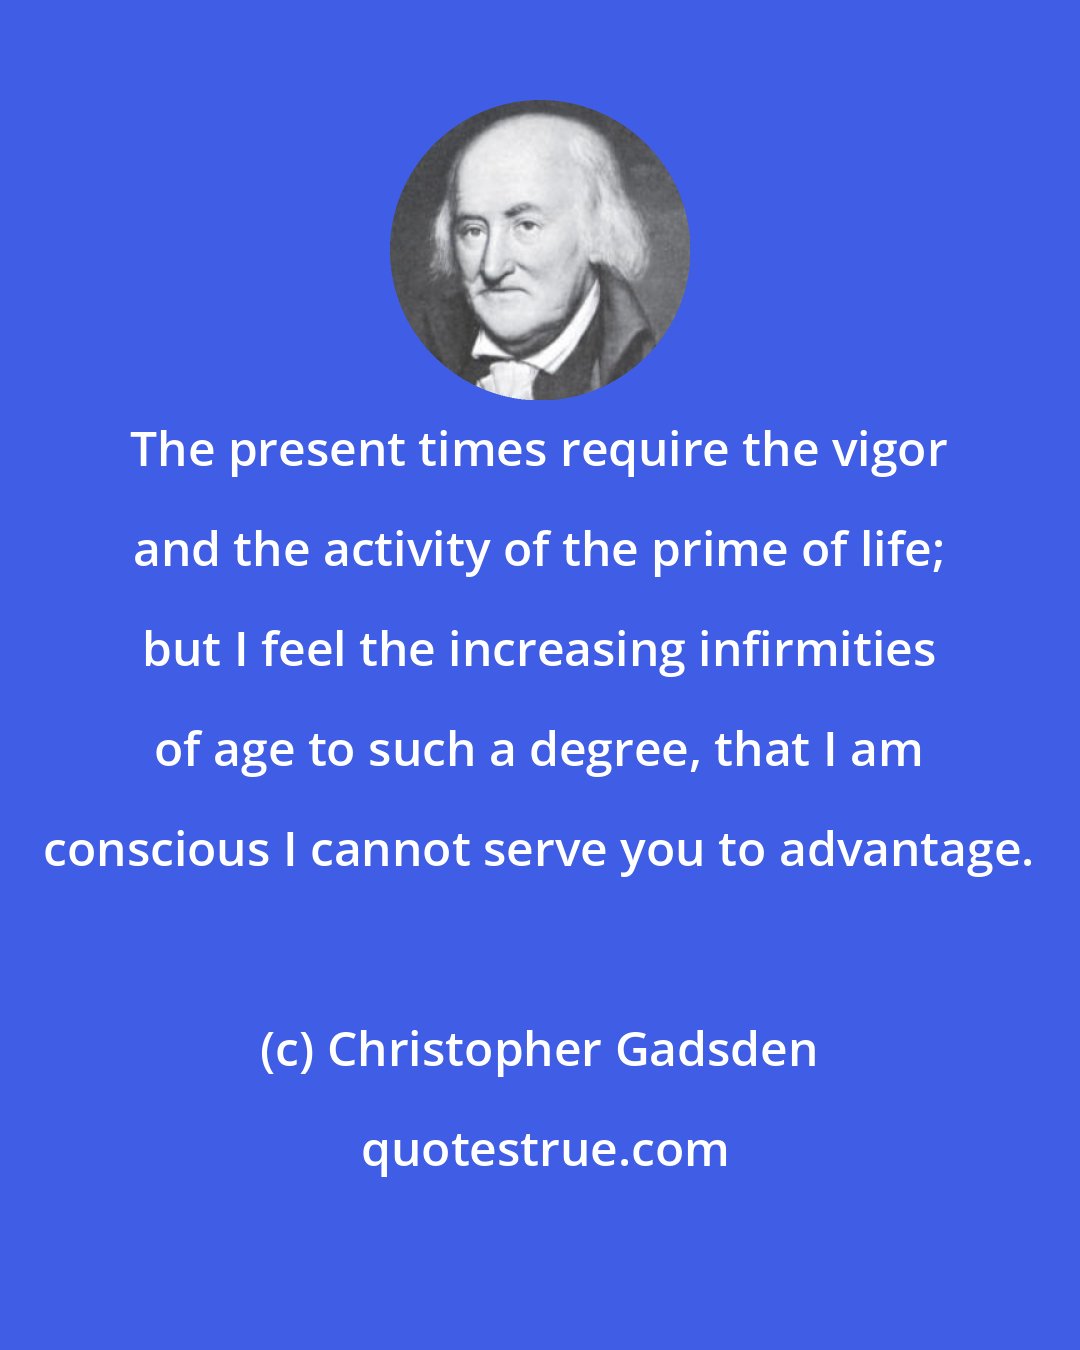 Christopher Gadsden: The present times require the vigor and the activity of the prime of life; but I feel the increasing infirmities of age to such a degree, that I am conscious I cannot serve you to advantage.